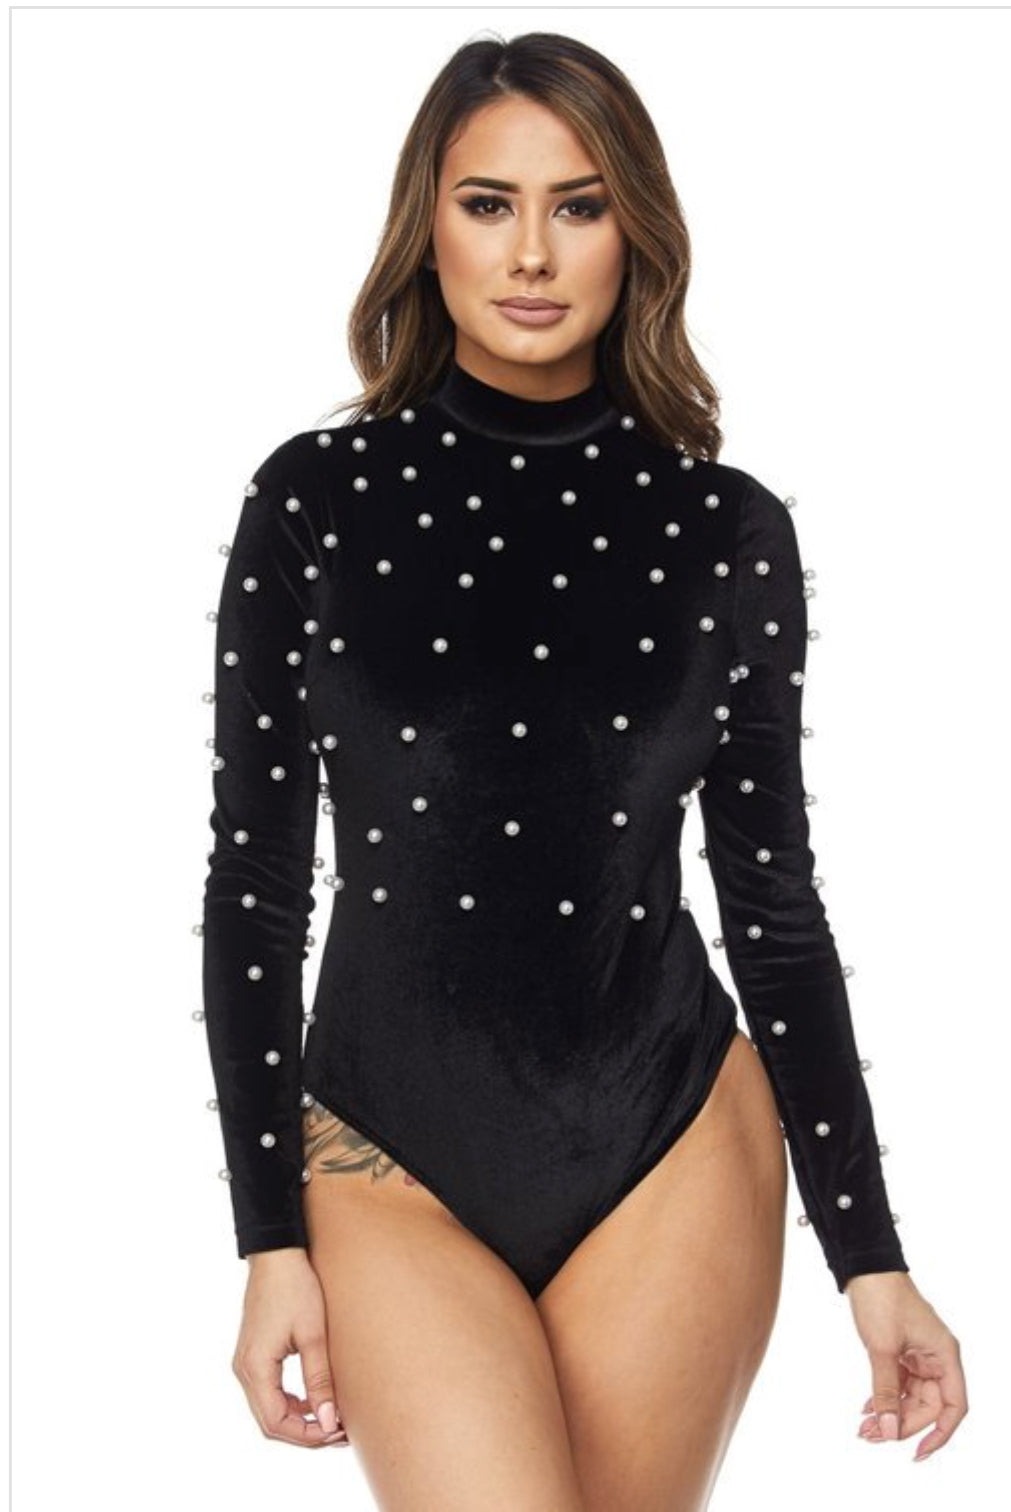 Bodysuit with Pearl Accent - SistahGirl